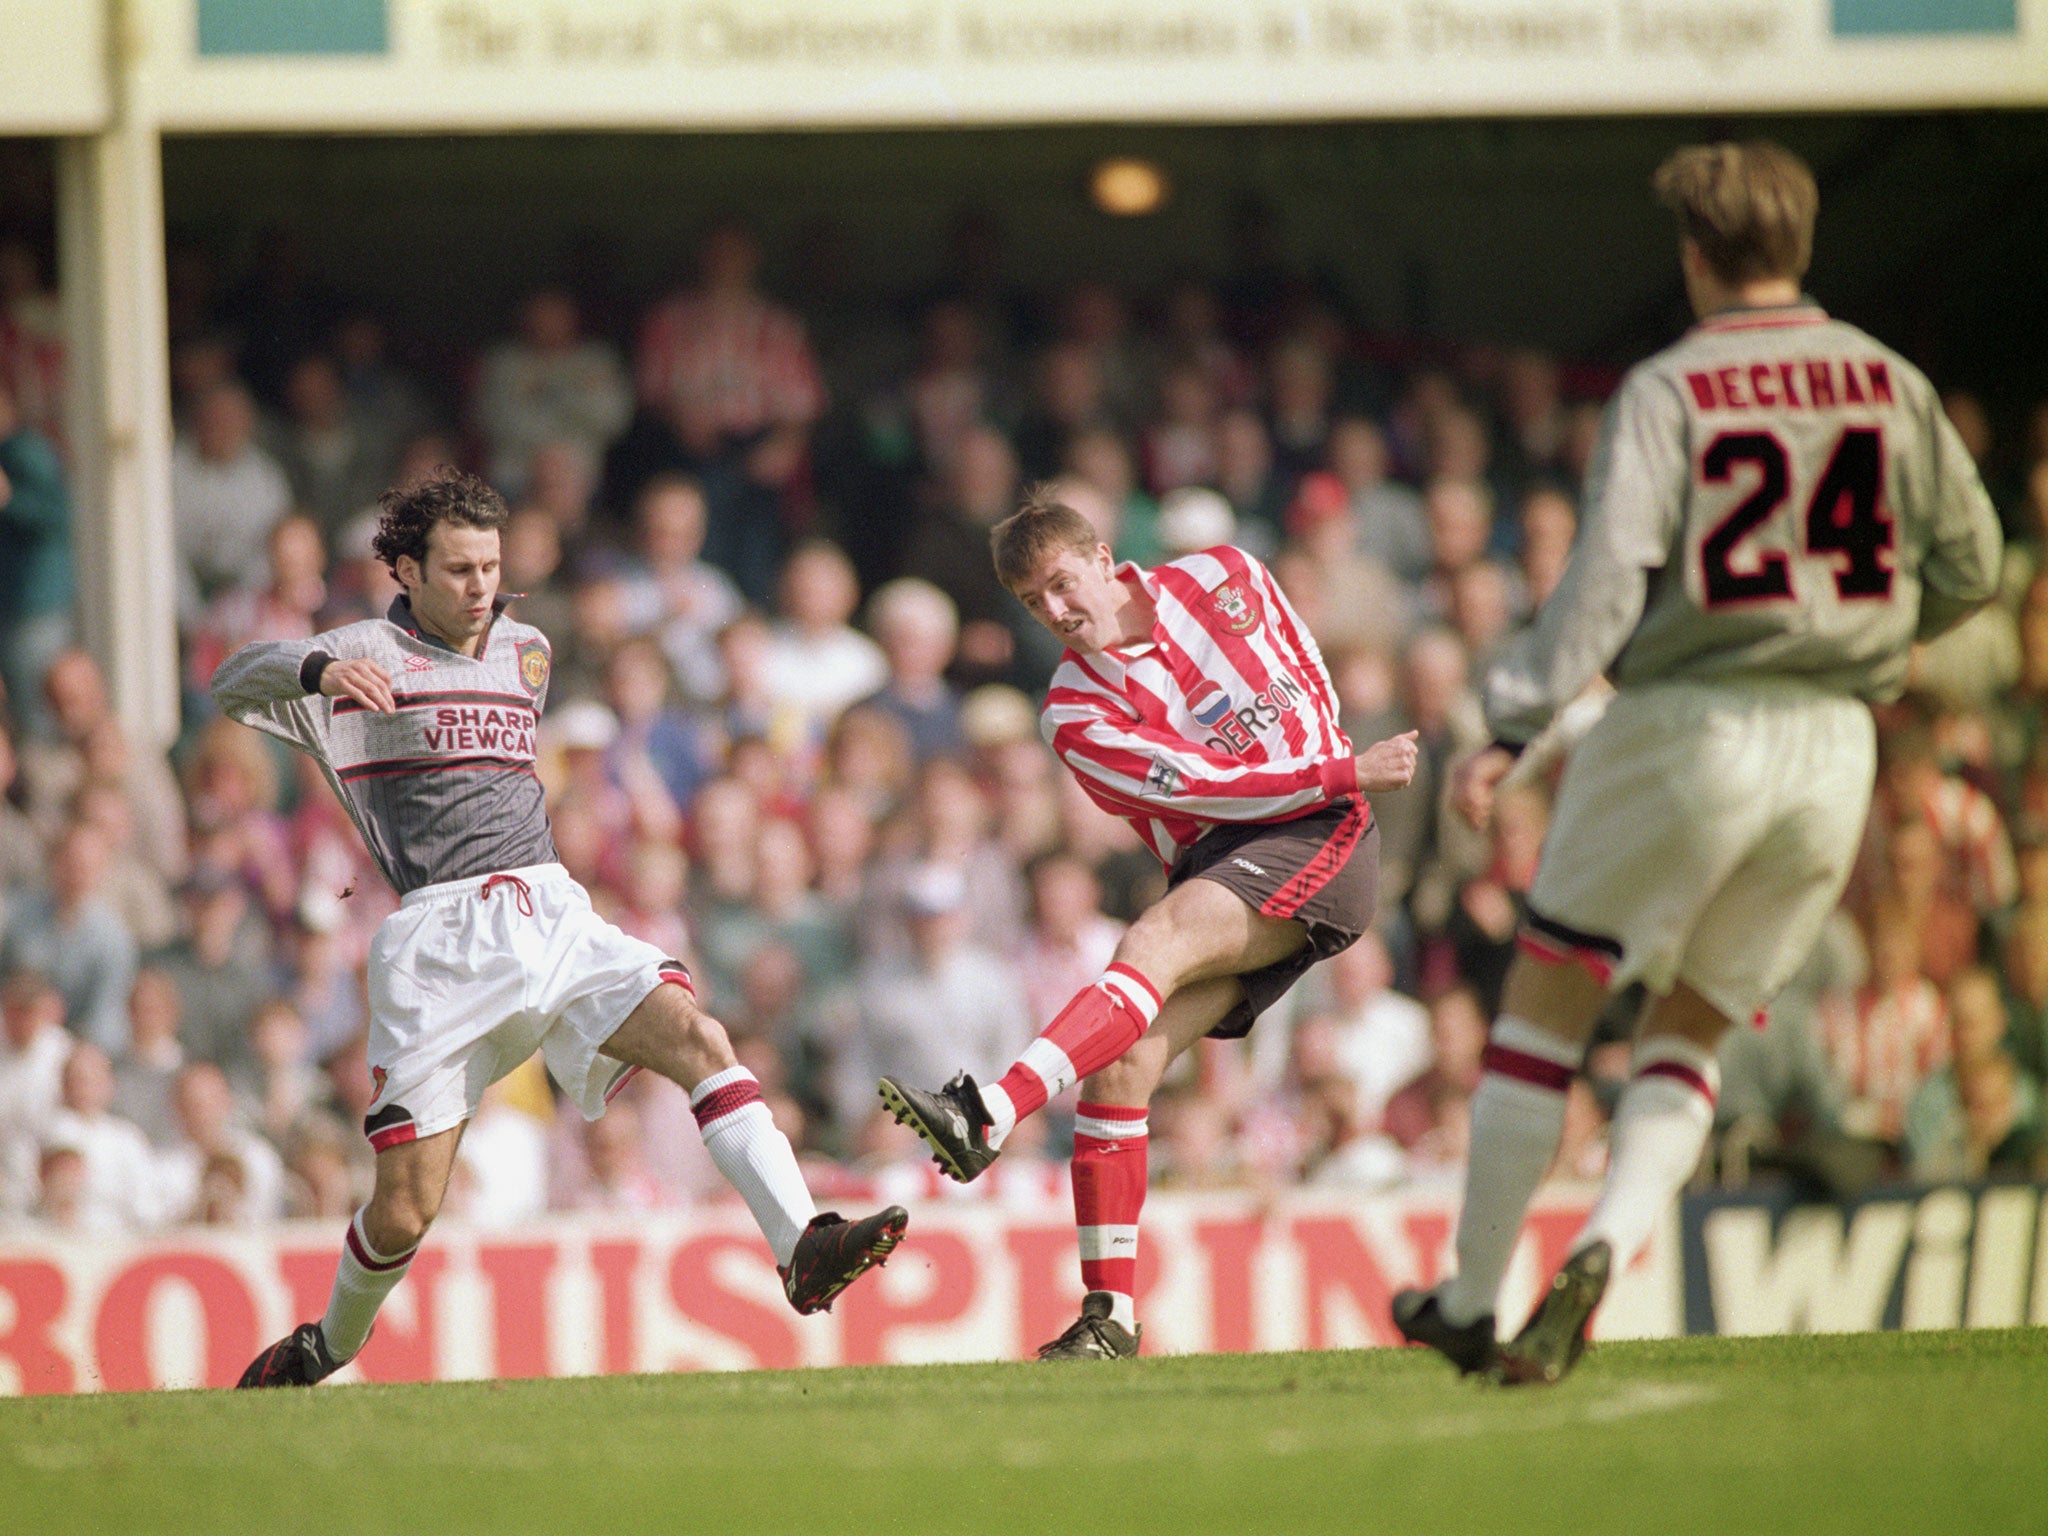 Le Tissier in action for Southampton against Manchester United during a Premiership match between the two sides in 1996